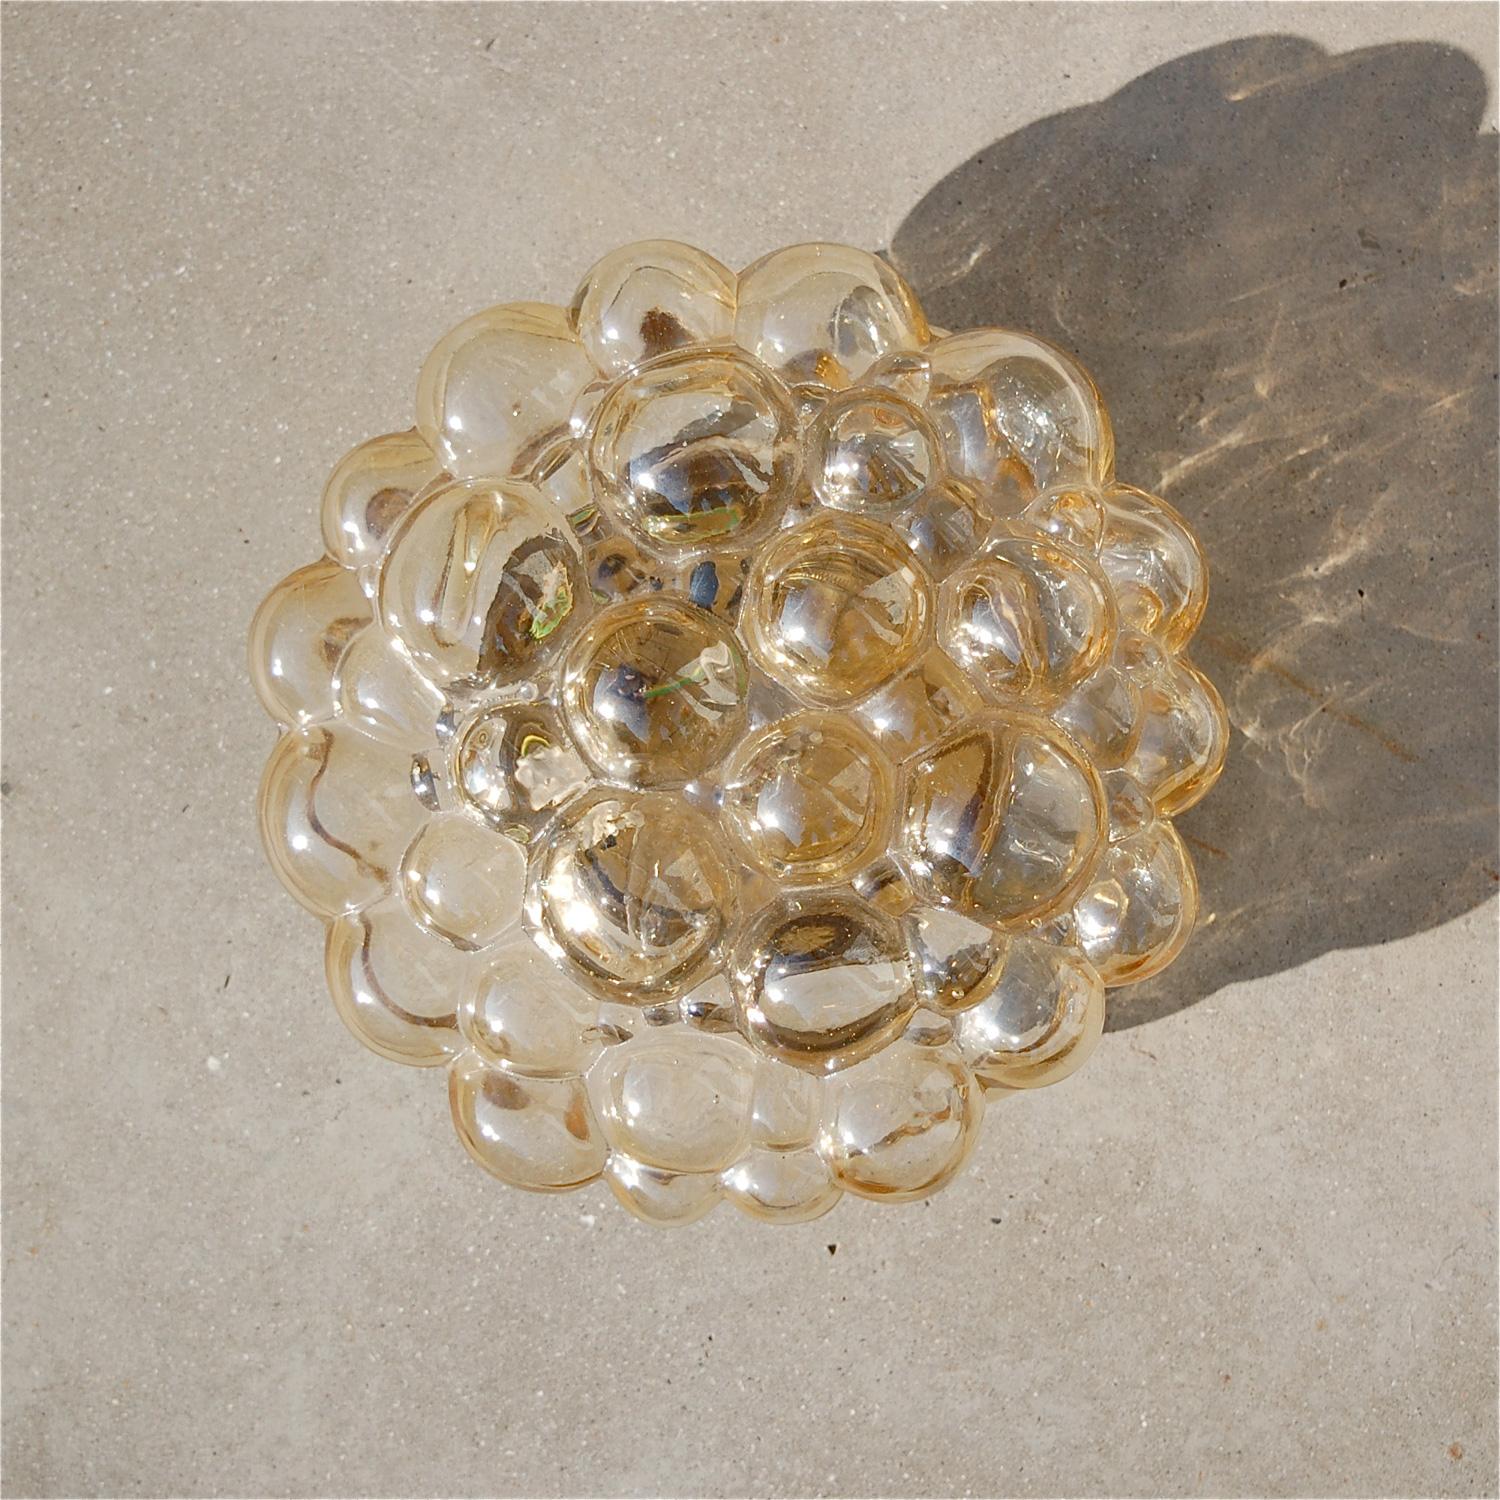 A bubble glass lamp designed by Helena Tynell for Glashütte Limburg (Germany) in a warm yellow, light gold or amber colour. It can be used both as a wall sconce or a flush mounted ceiling light. It has a very playful and organic shape, mimicking air